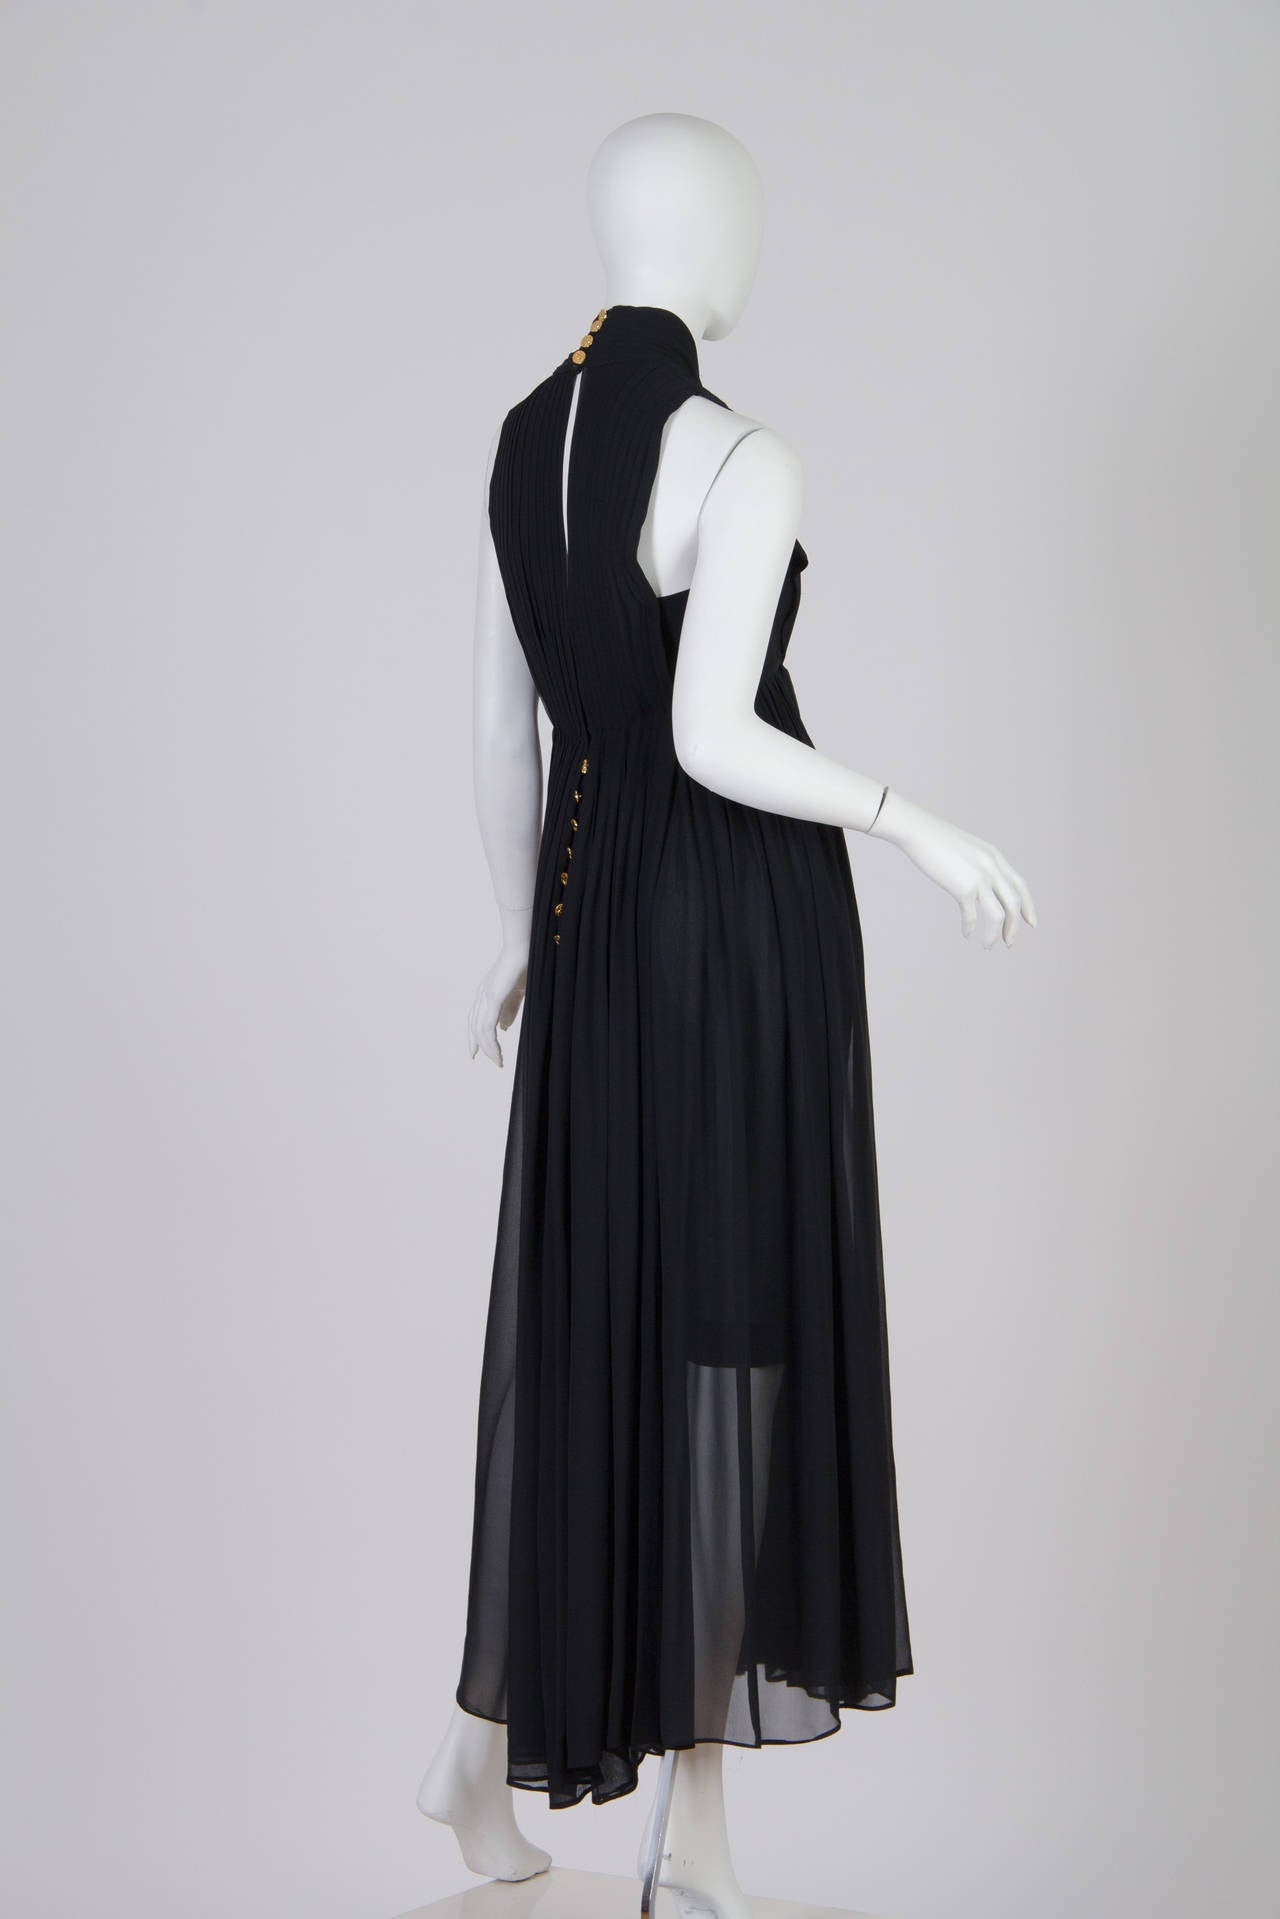 Very fine work on this gown from Chanel. The label reads boutique but this vintage quality gown is made better than the boutique clothing they make today. There are two internal waist stays to ensure that the dress stays put and numerous gold Chanel